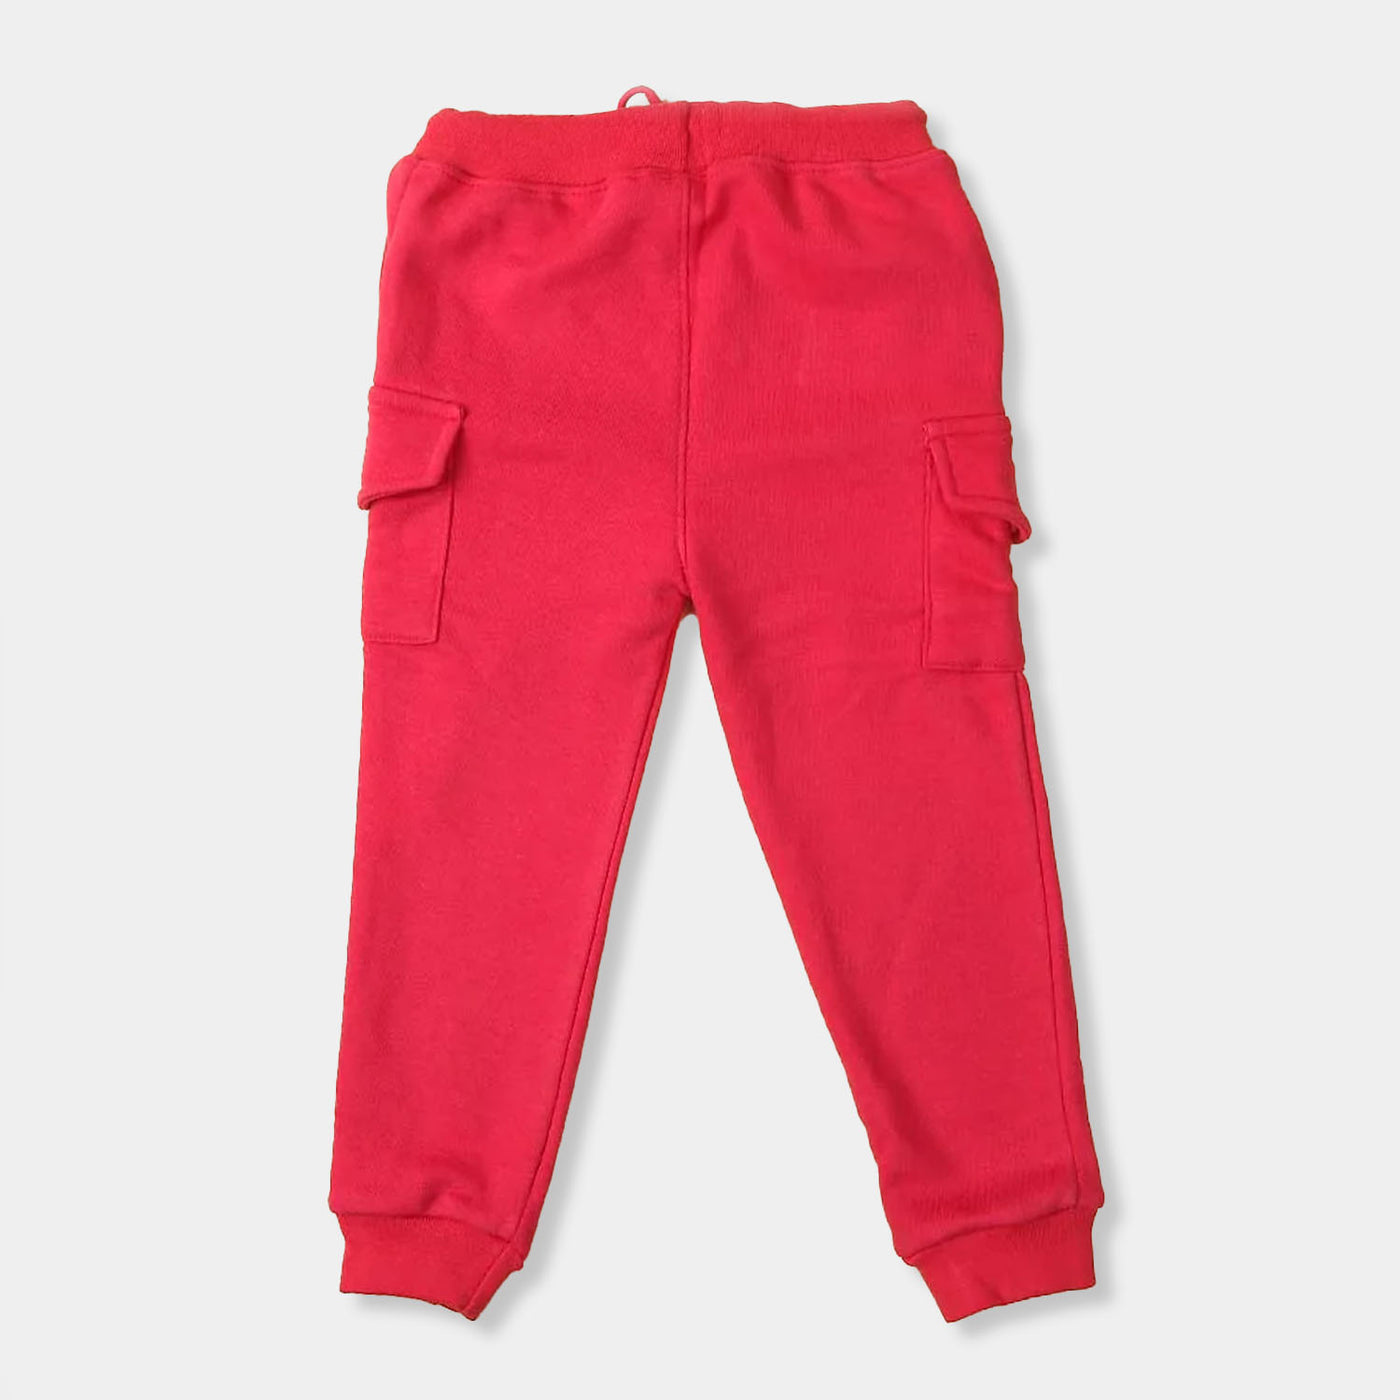 Future Awesome Pajama For Girls - Hot Pink (GP-16)